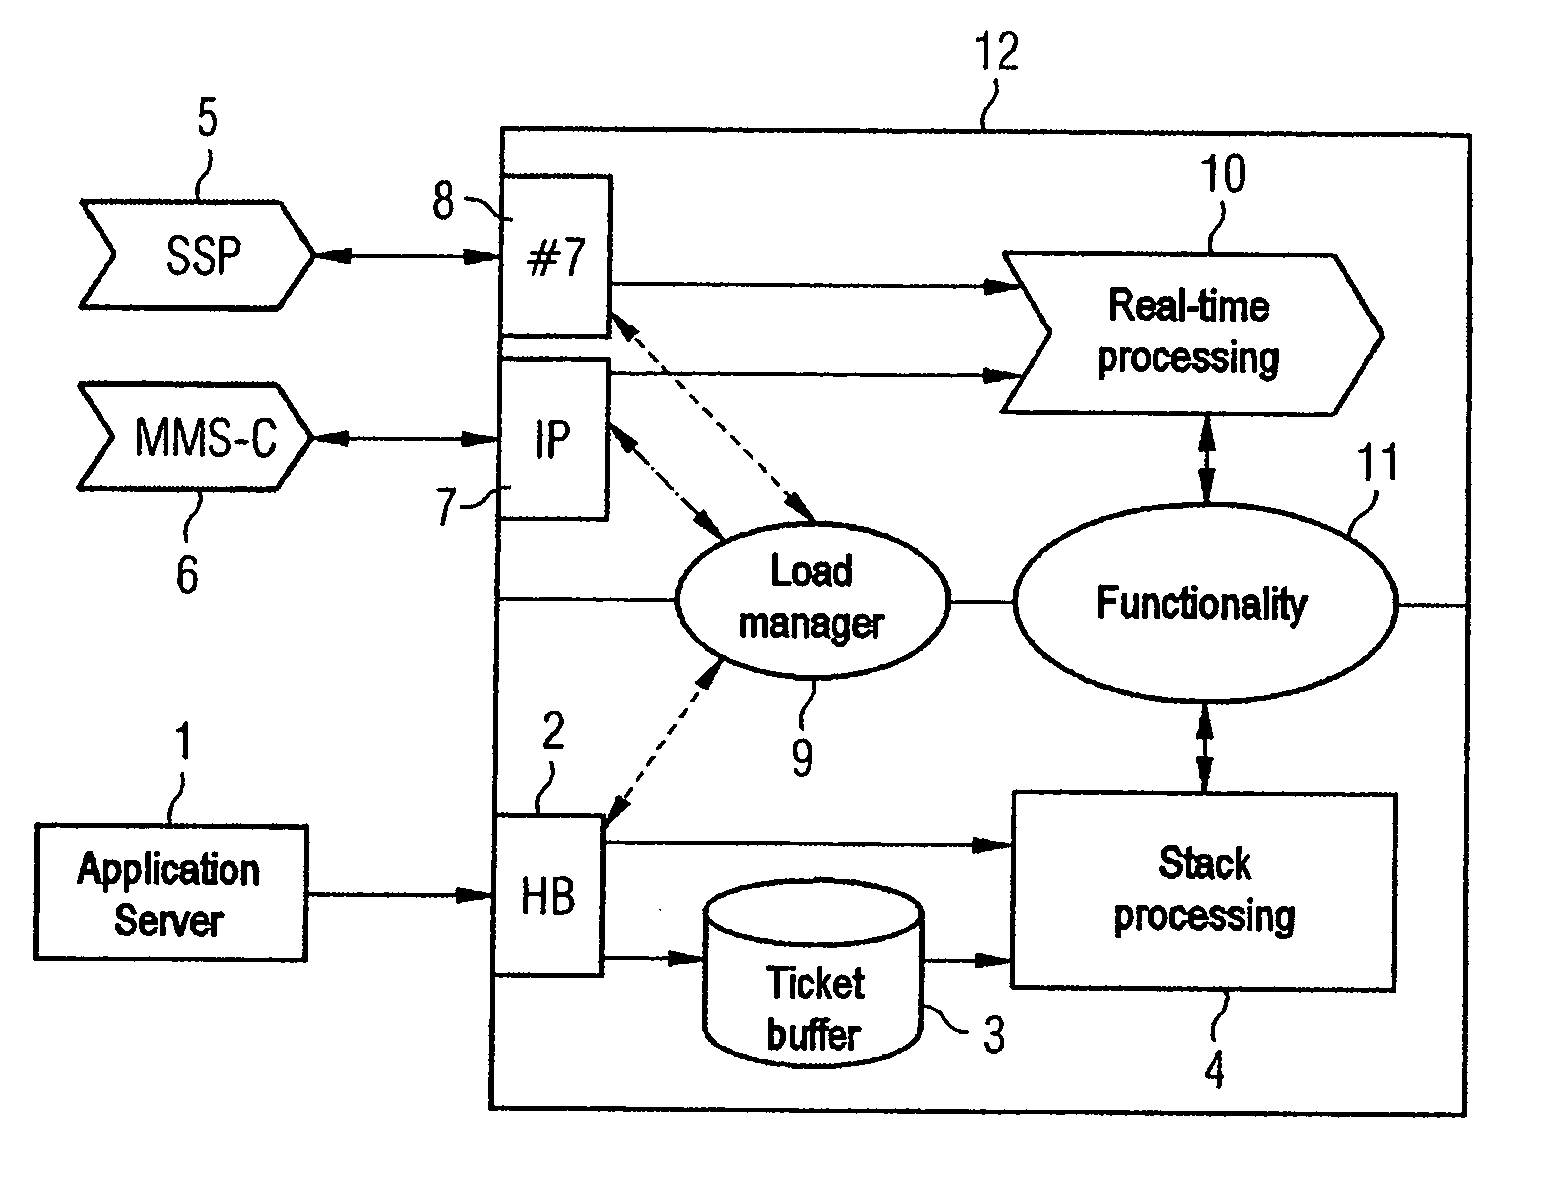 Dynamic processing of data processing instructions